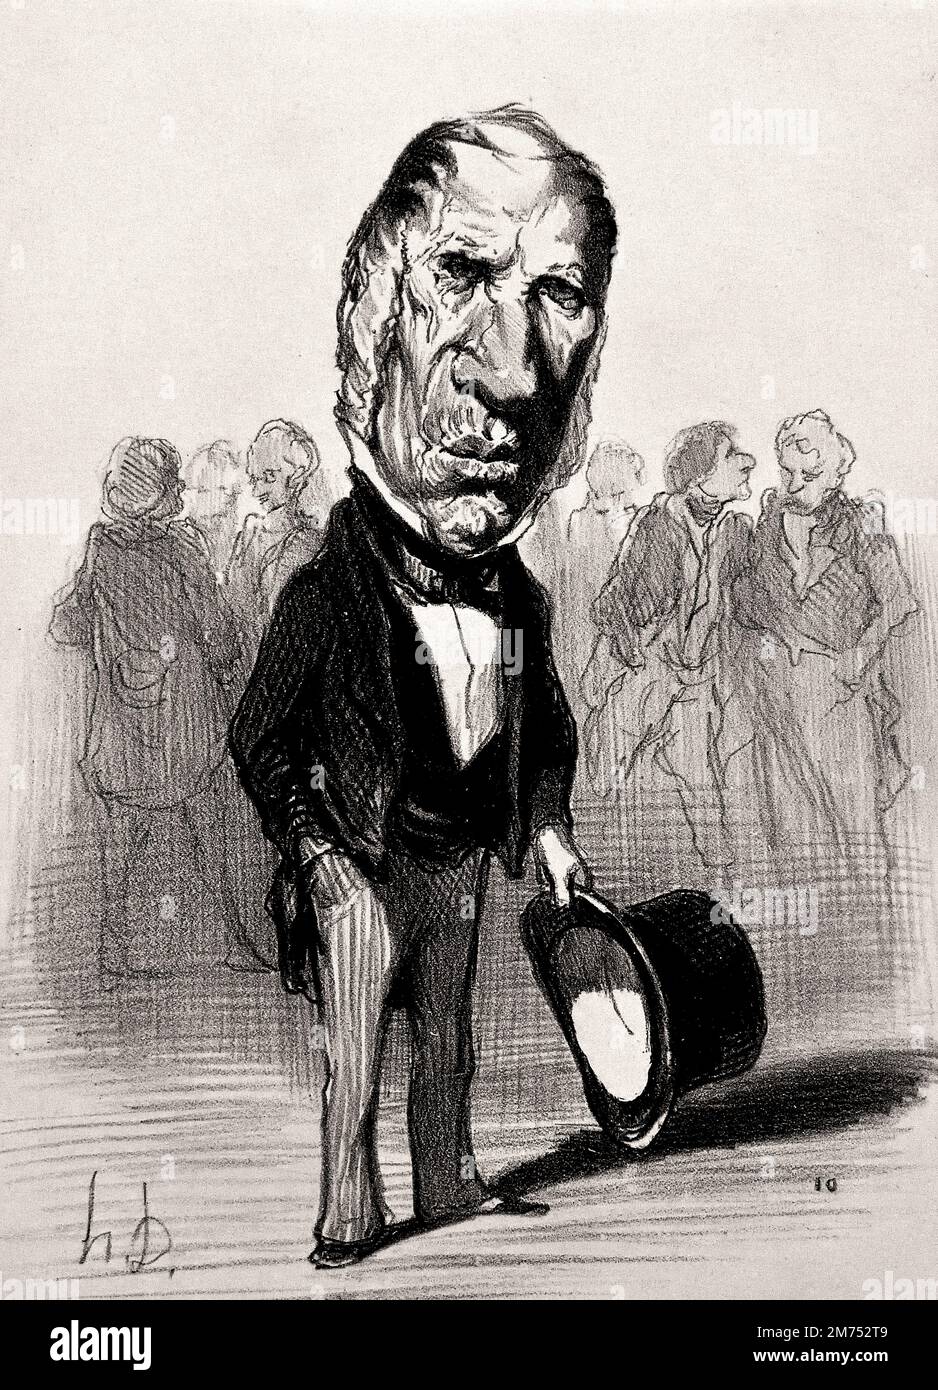 Dupin 1848 by Honore Daumier 1808-1879 ( Honoré-Victorin Daumier was a French painter, sculptor, and printmaker, whose many works offer commentary on the social and political life in France ) Stock Photo